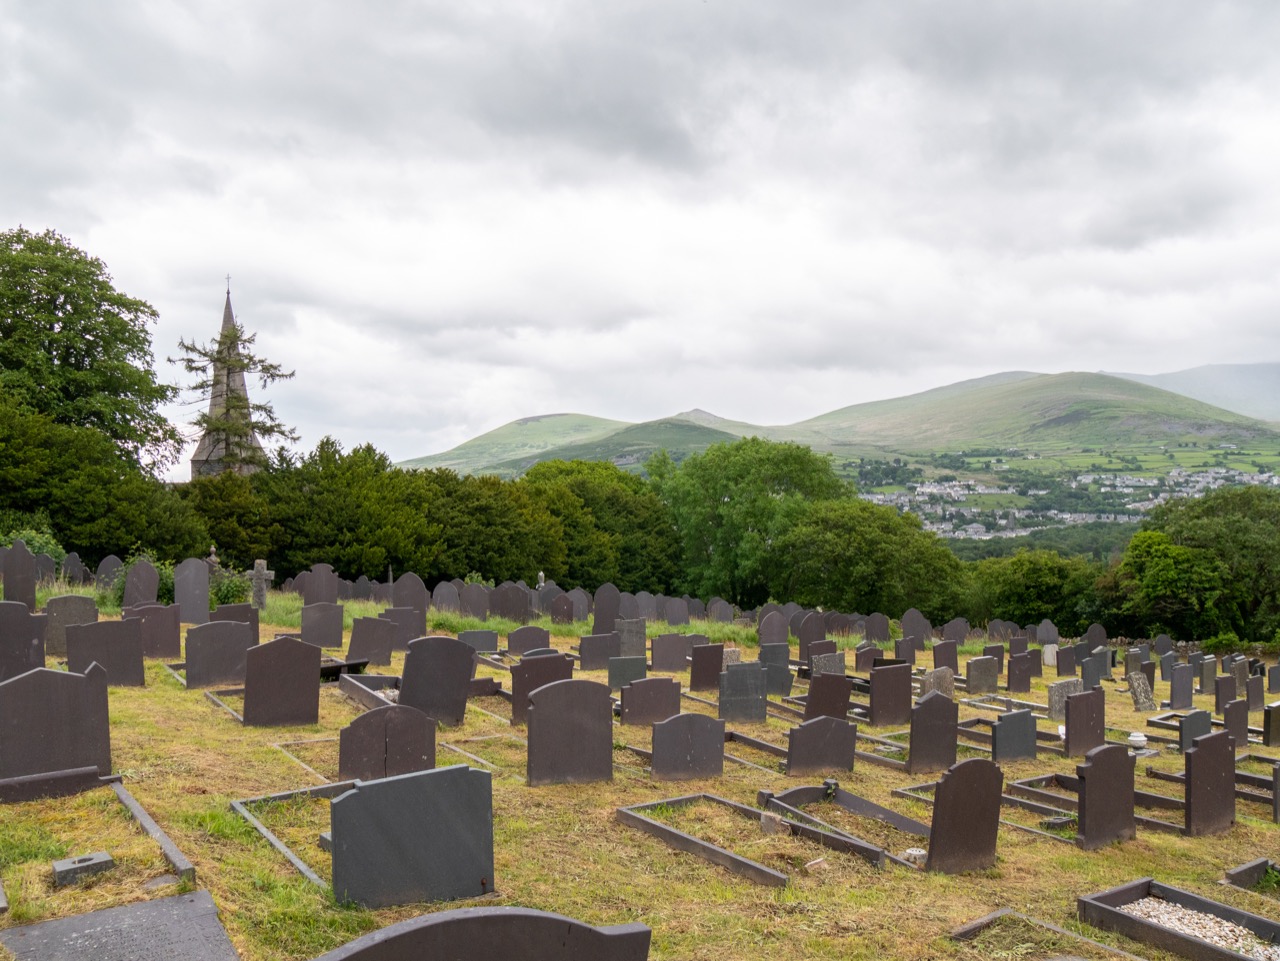 View from the graveyard towards north east